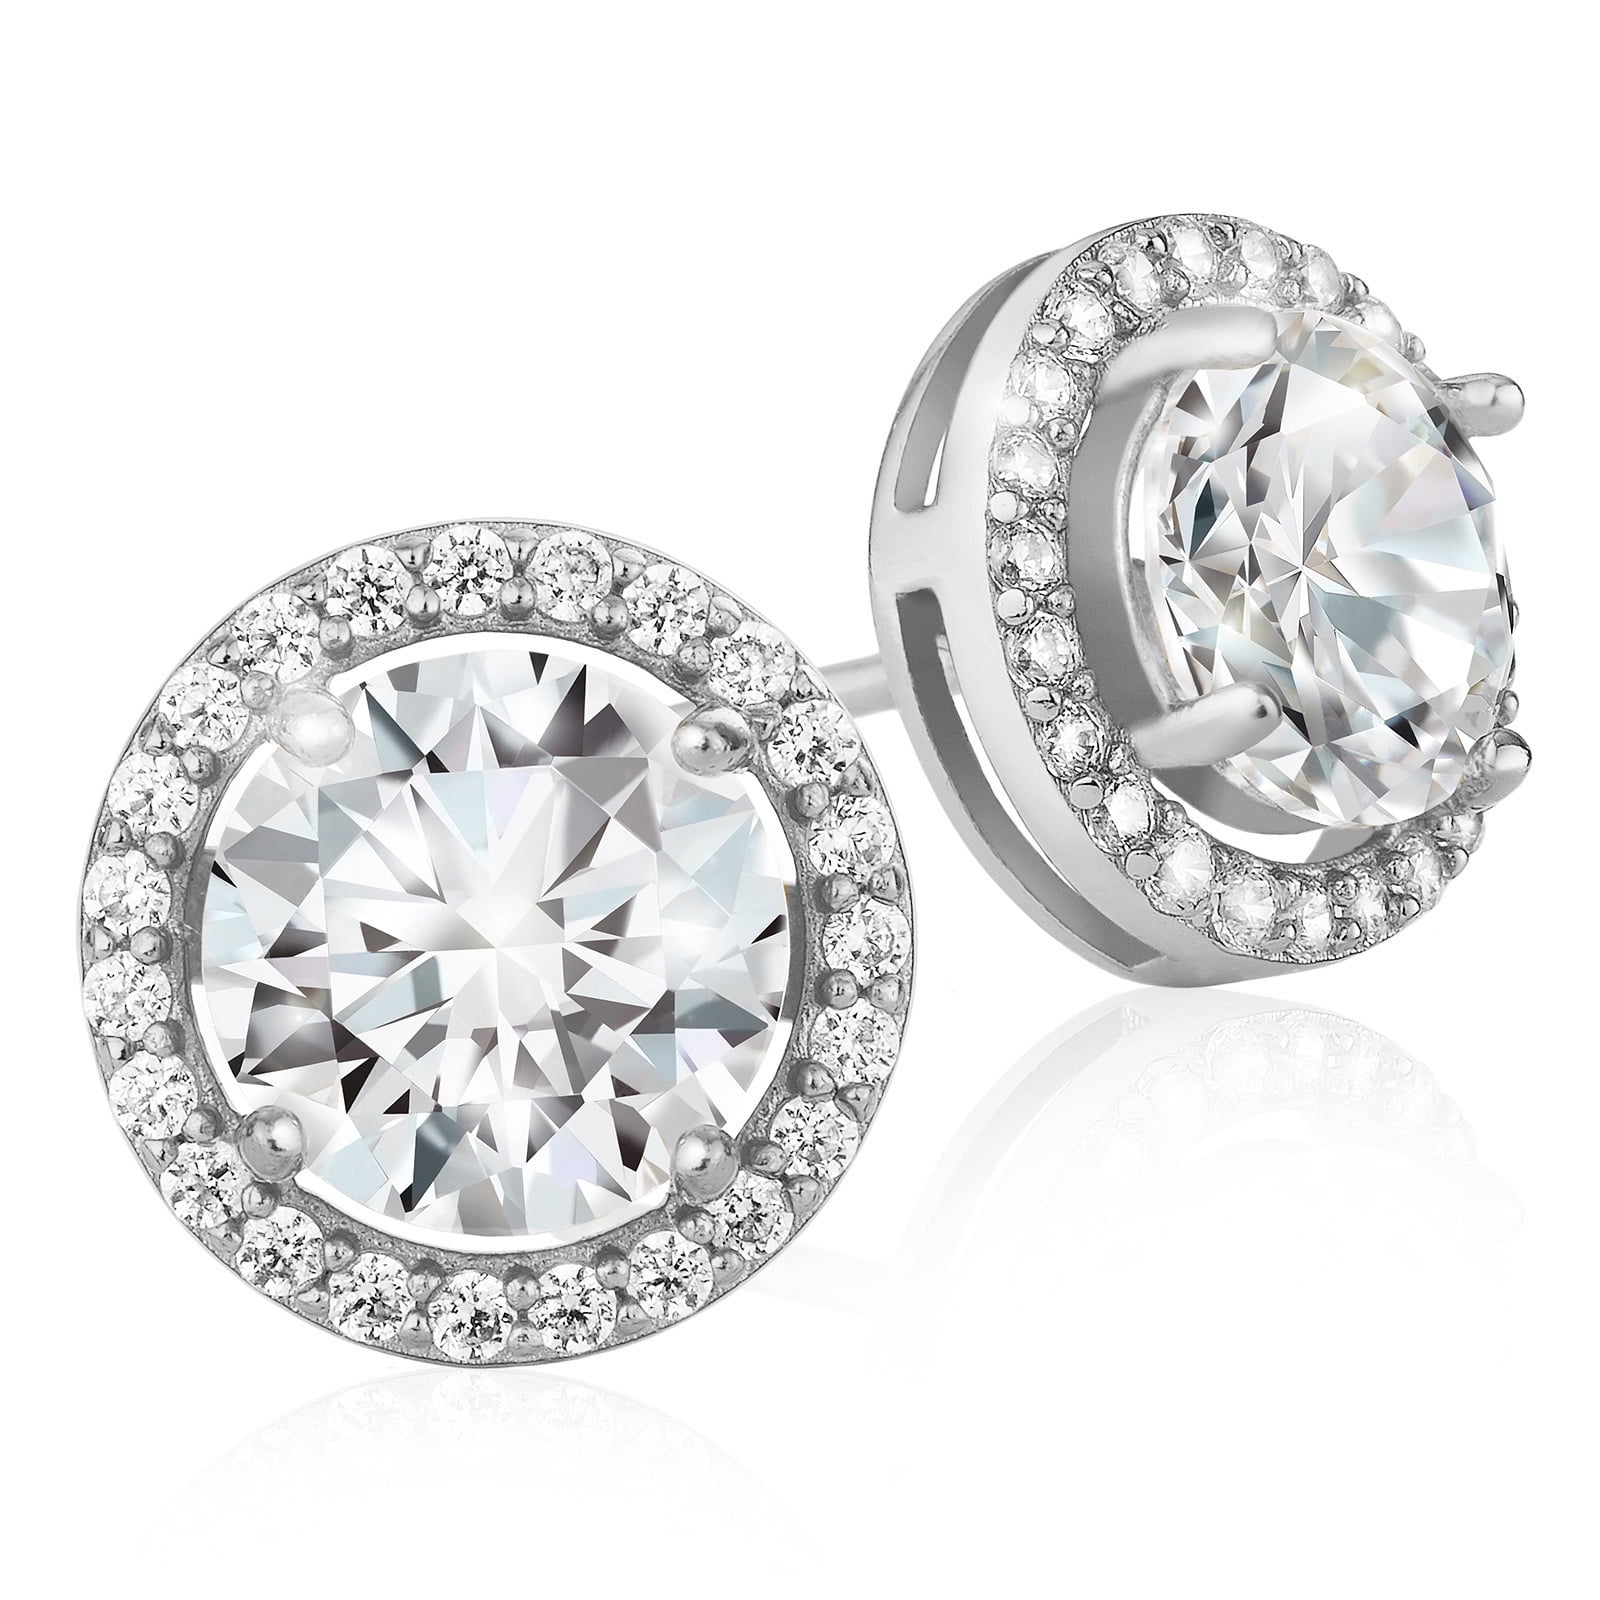 New Halo round multi micro CZ stones .925 Sterling Silver Stud Earrings Unisex